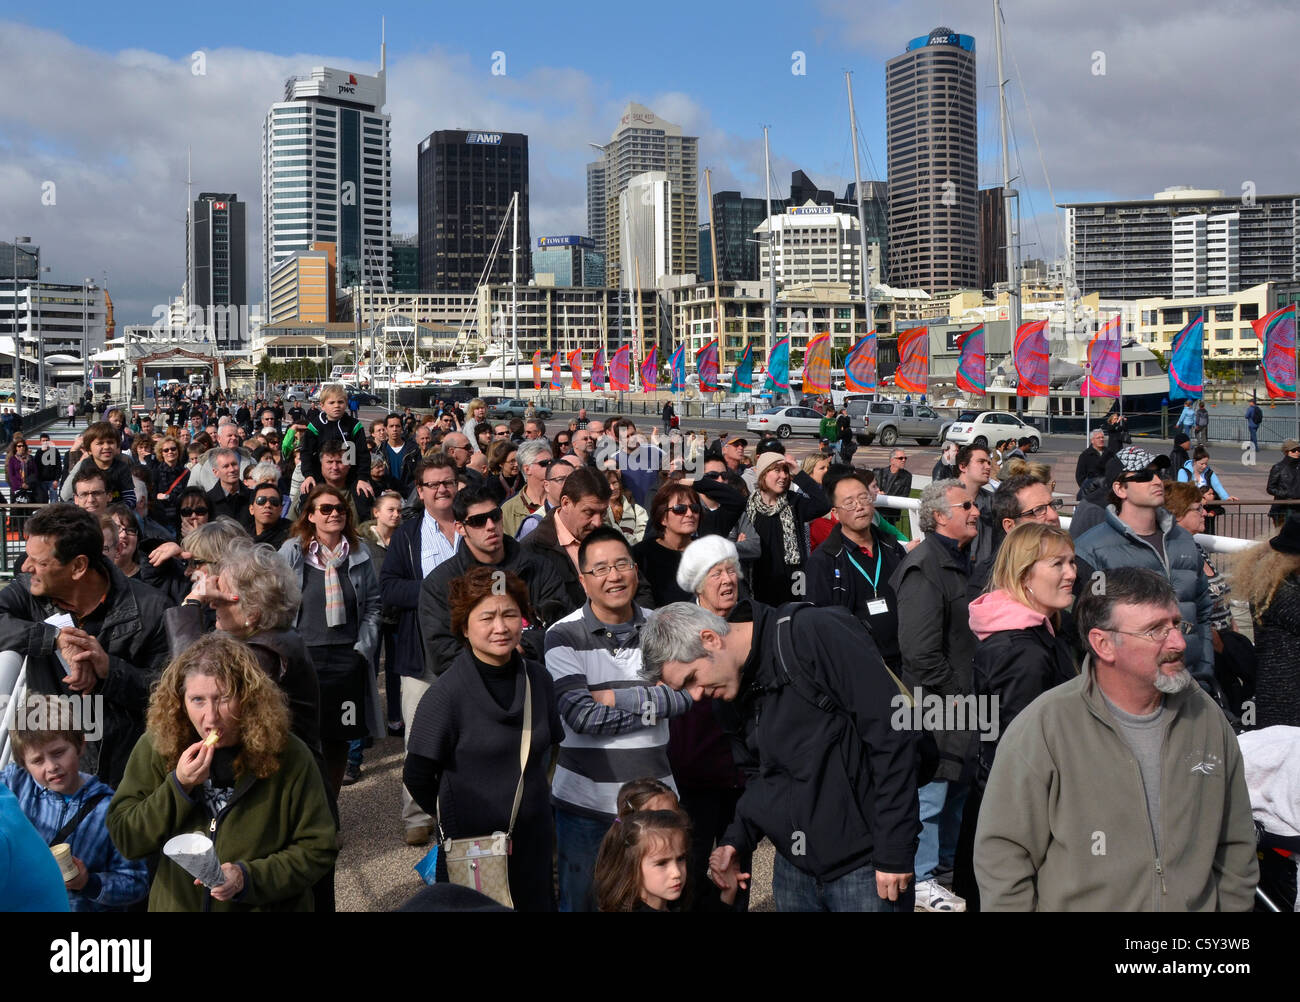 Crowds waiting for the Wynyard Crossing bridge to open, Viaduct Harbour, Auckland New Zealand Stock Photo